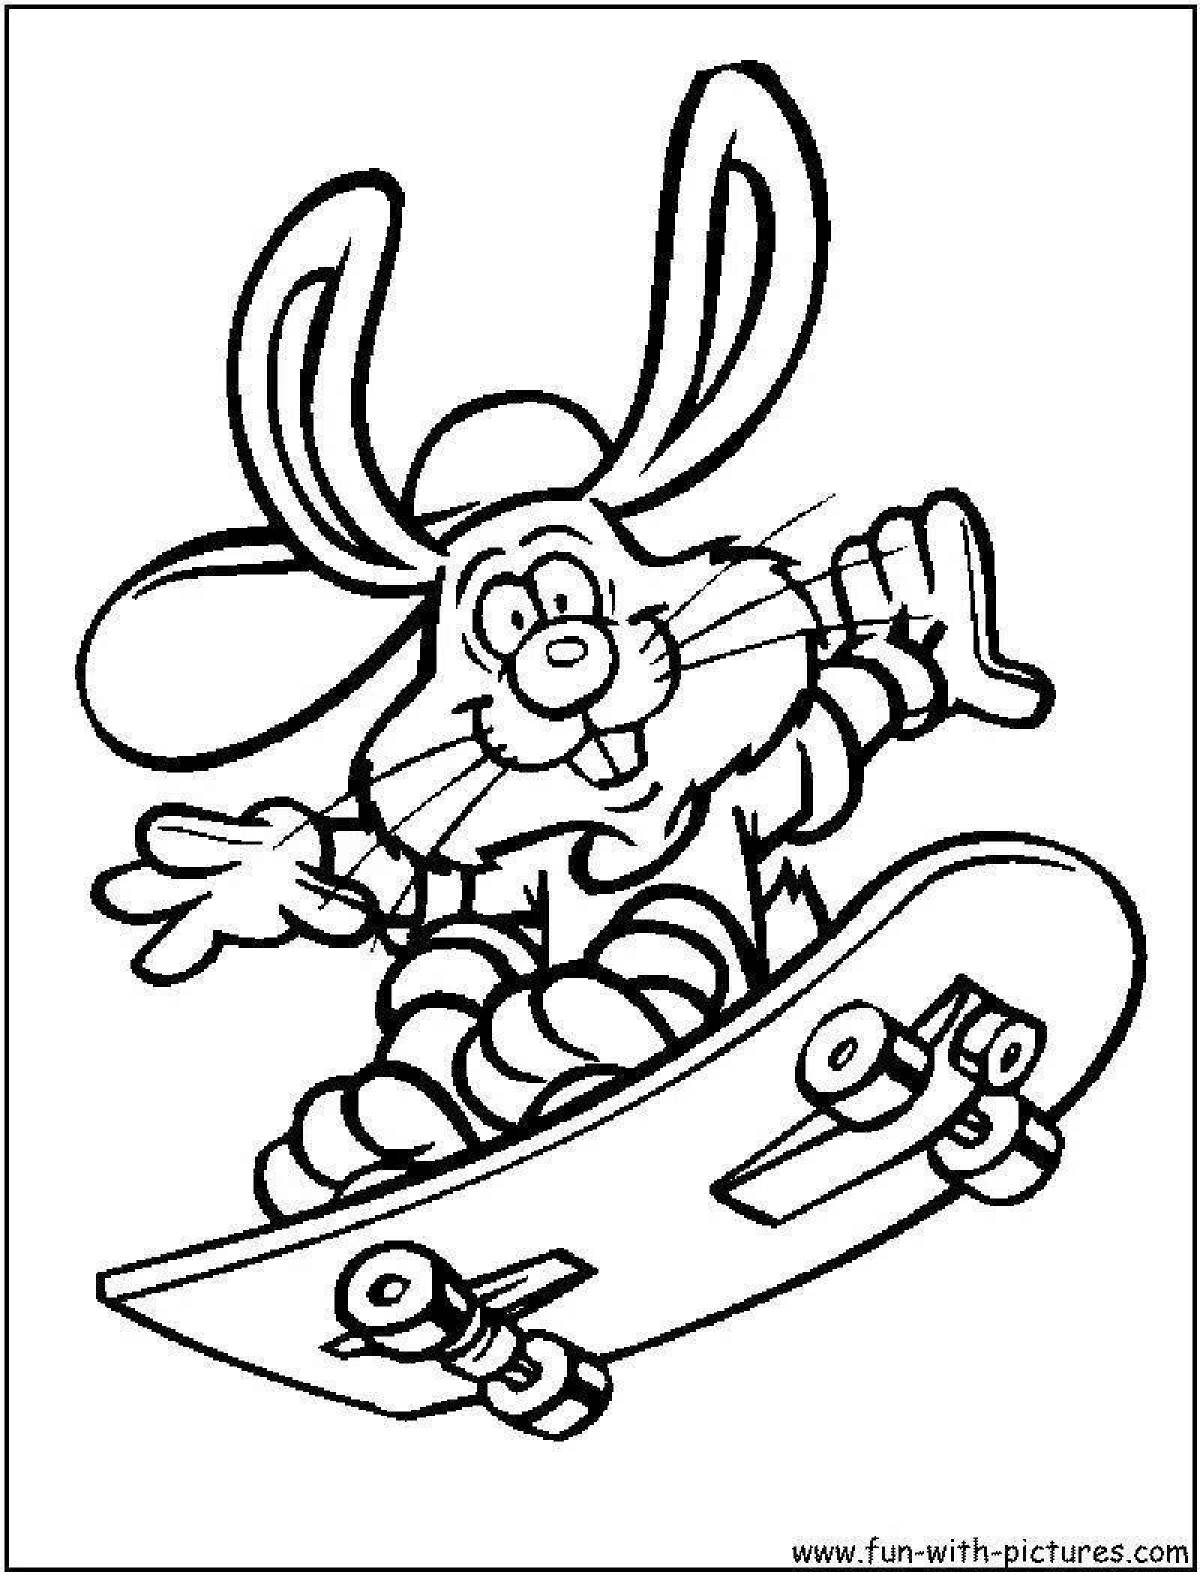 Coloring book sports skateboarder